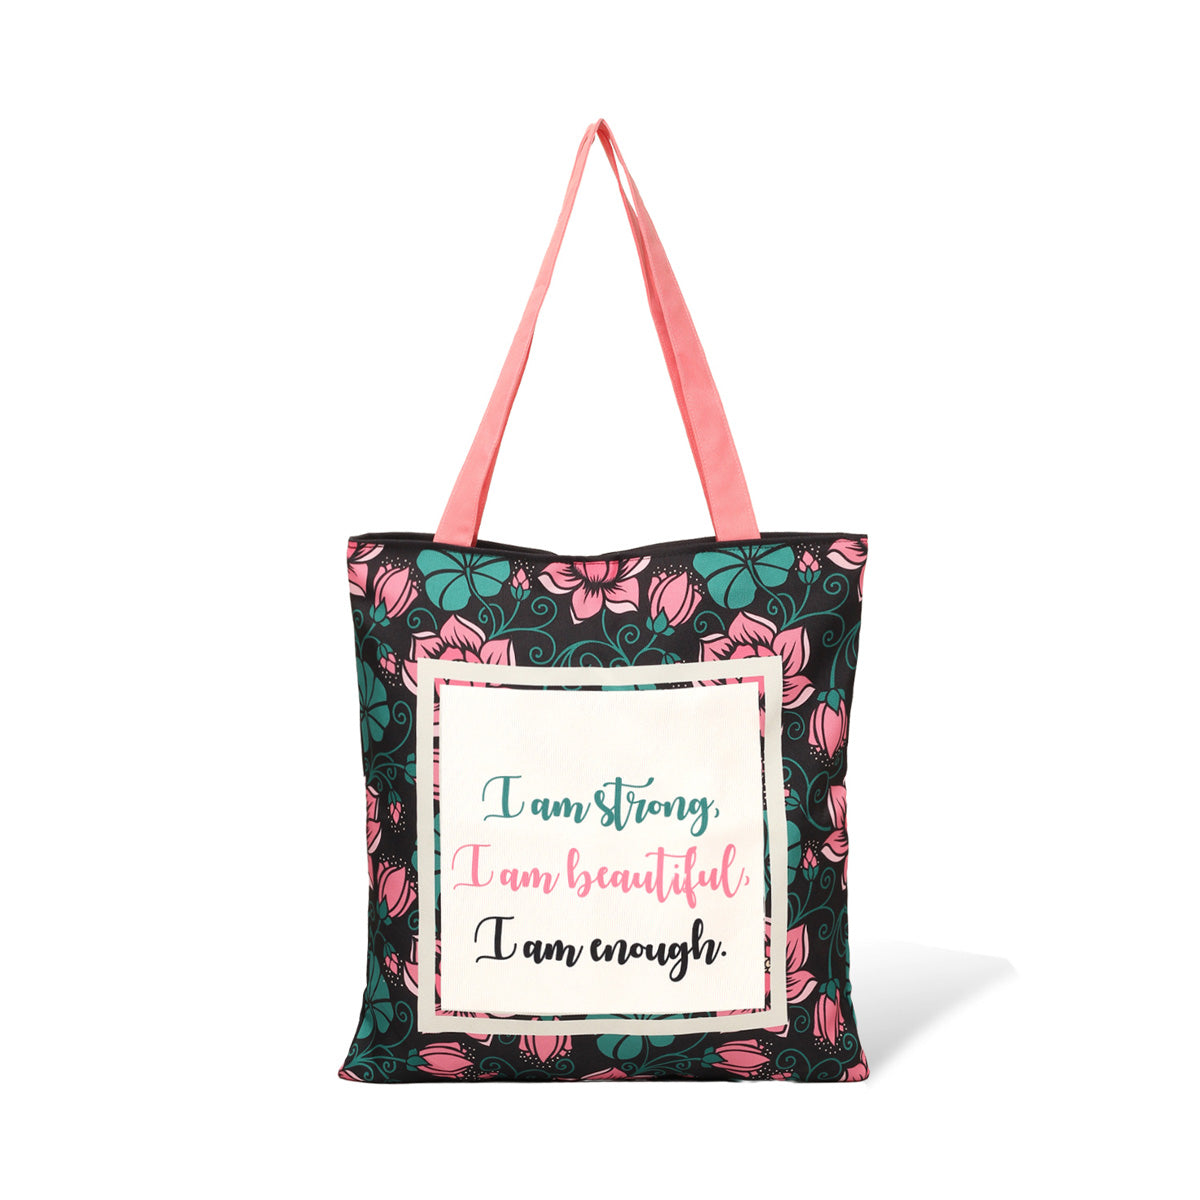 Stylish tote bag with the inspiring words "I am strong, I am beautiful, I am strong"